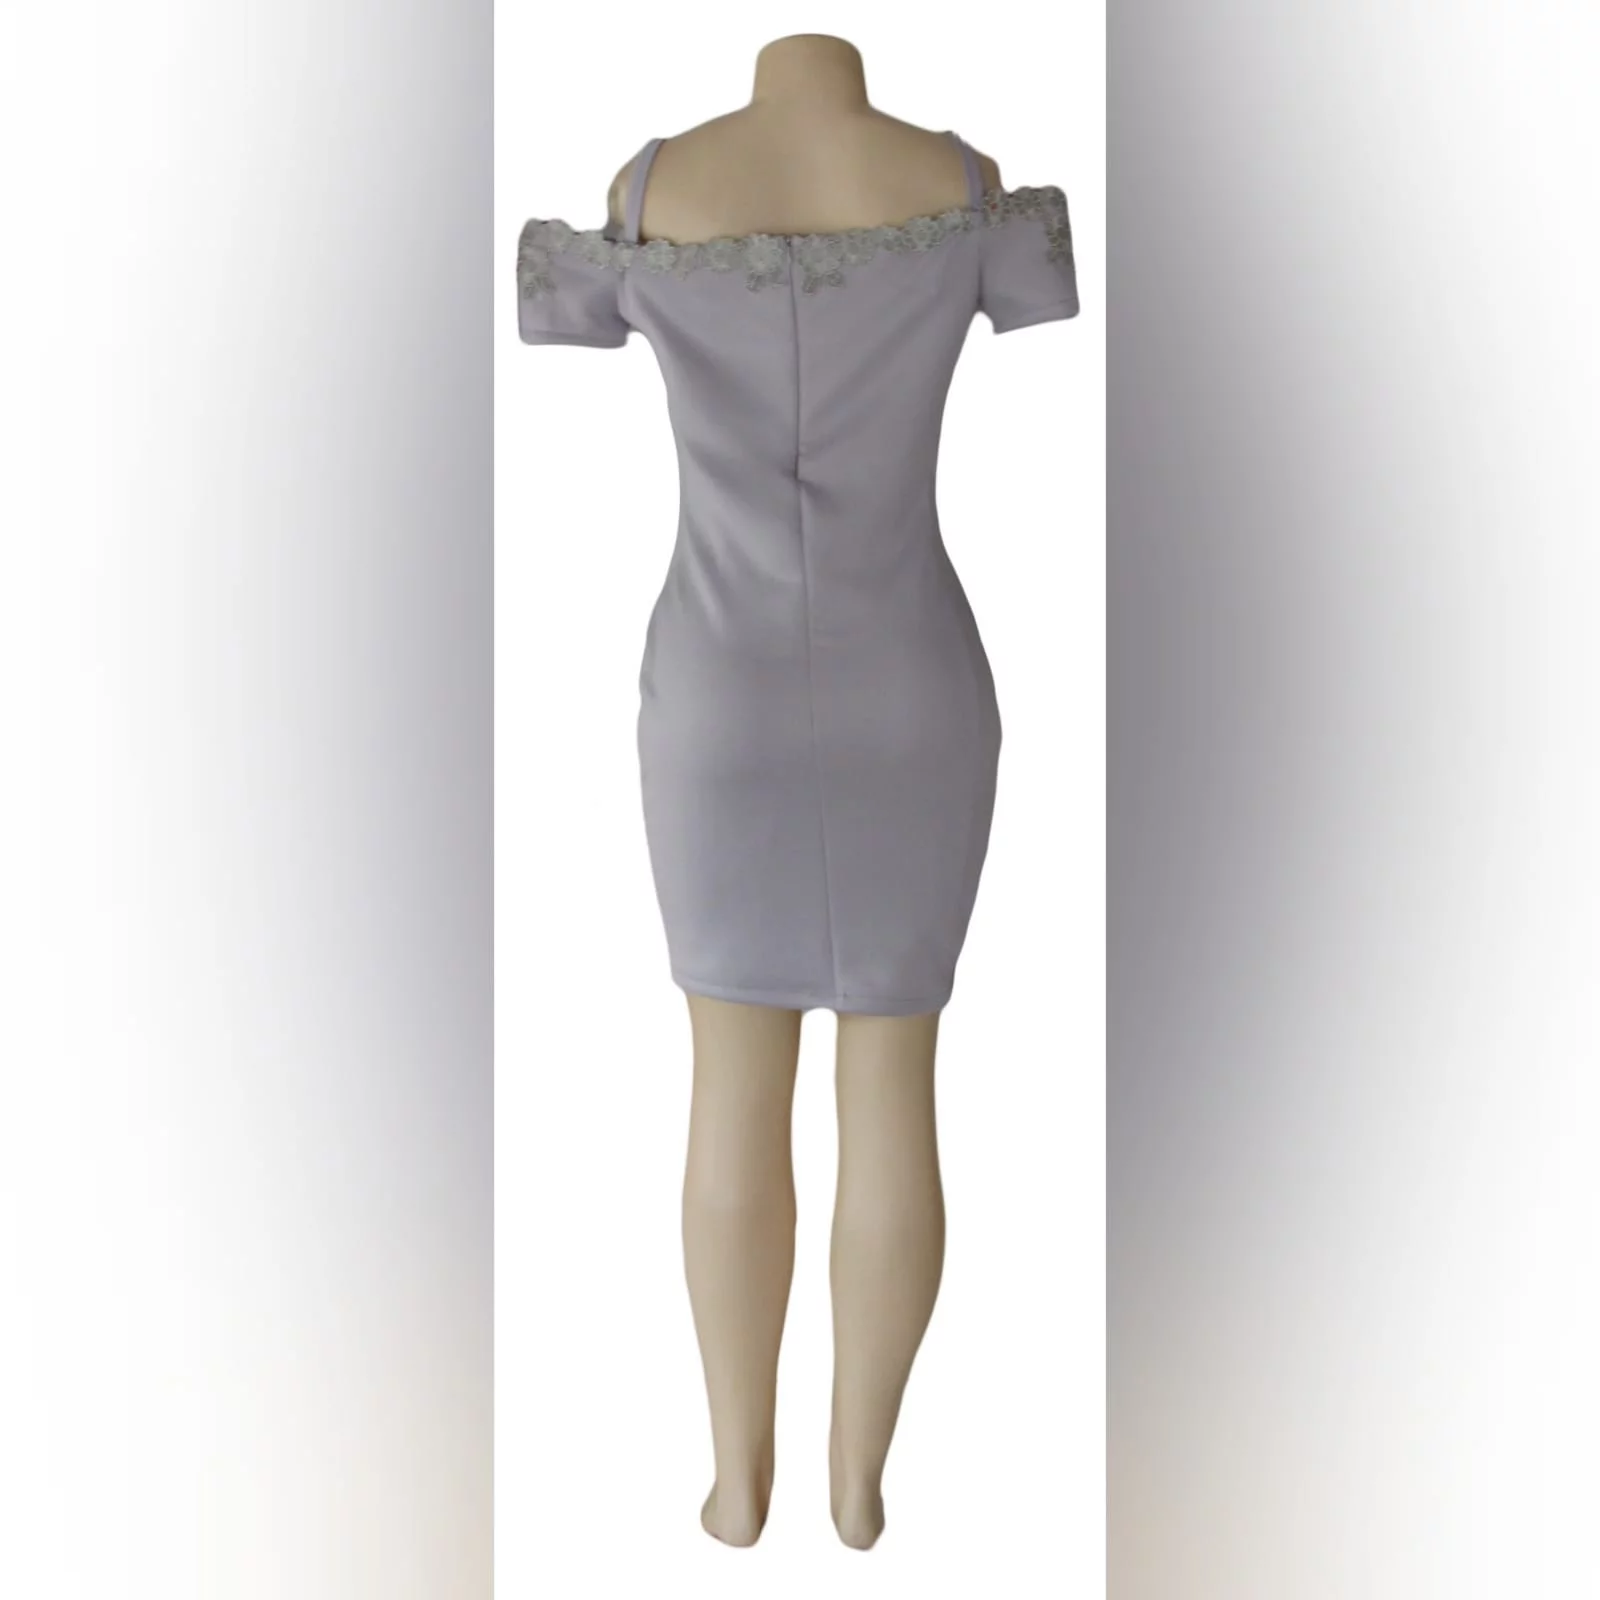 Light grey short fitted smart casual dress 2 light grey short fitted smart casual dress, with off shoulder shorter sleeves and shoulder straps. Neckline detailed with silver lace.